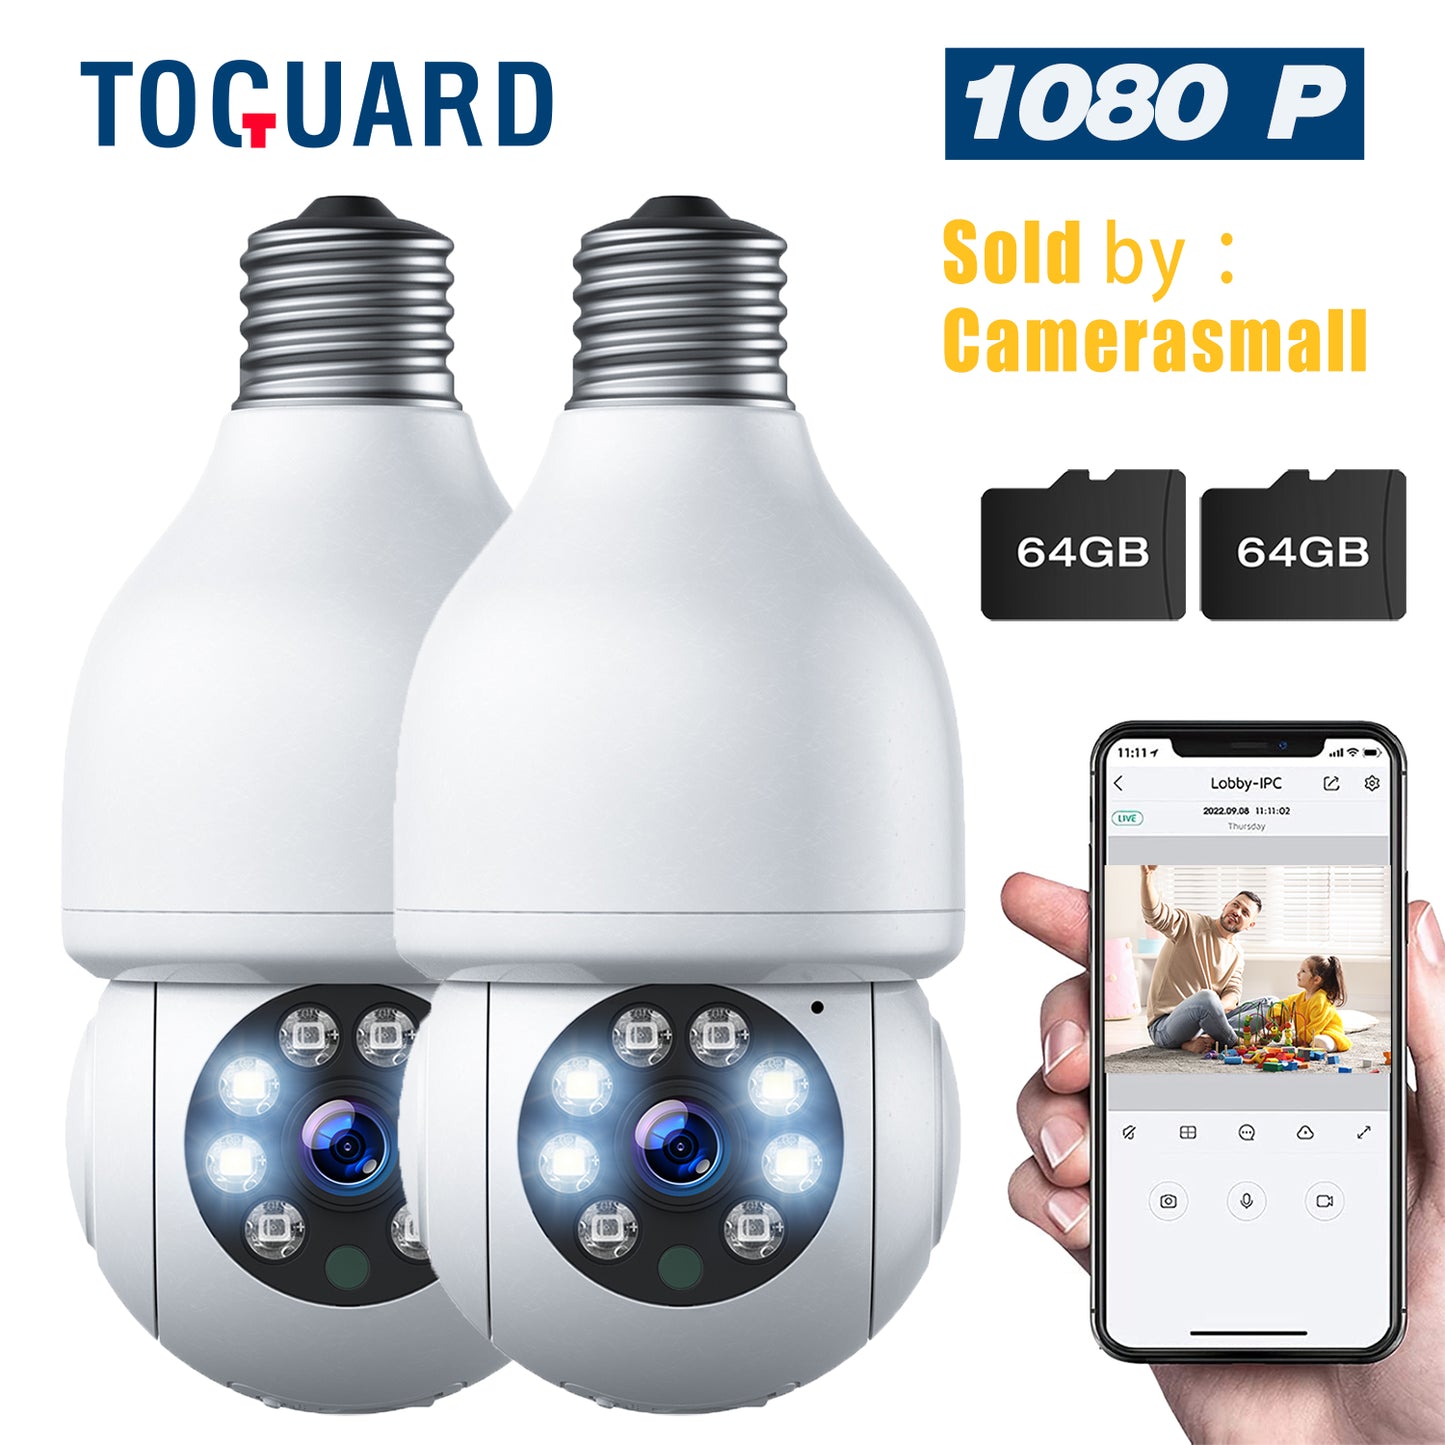 Toguard 2 PACKS SC16 Light Bulb Security Camera Outdoor Wireless WiFi Dome Surveillance Camera with Micro SD Card